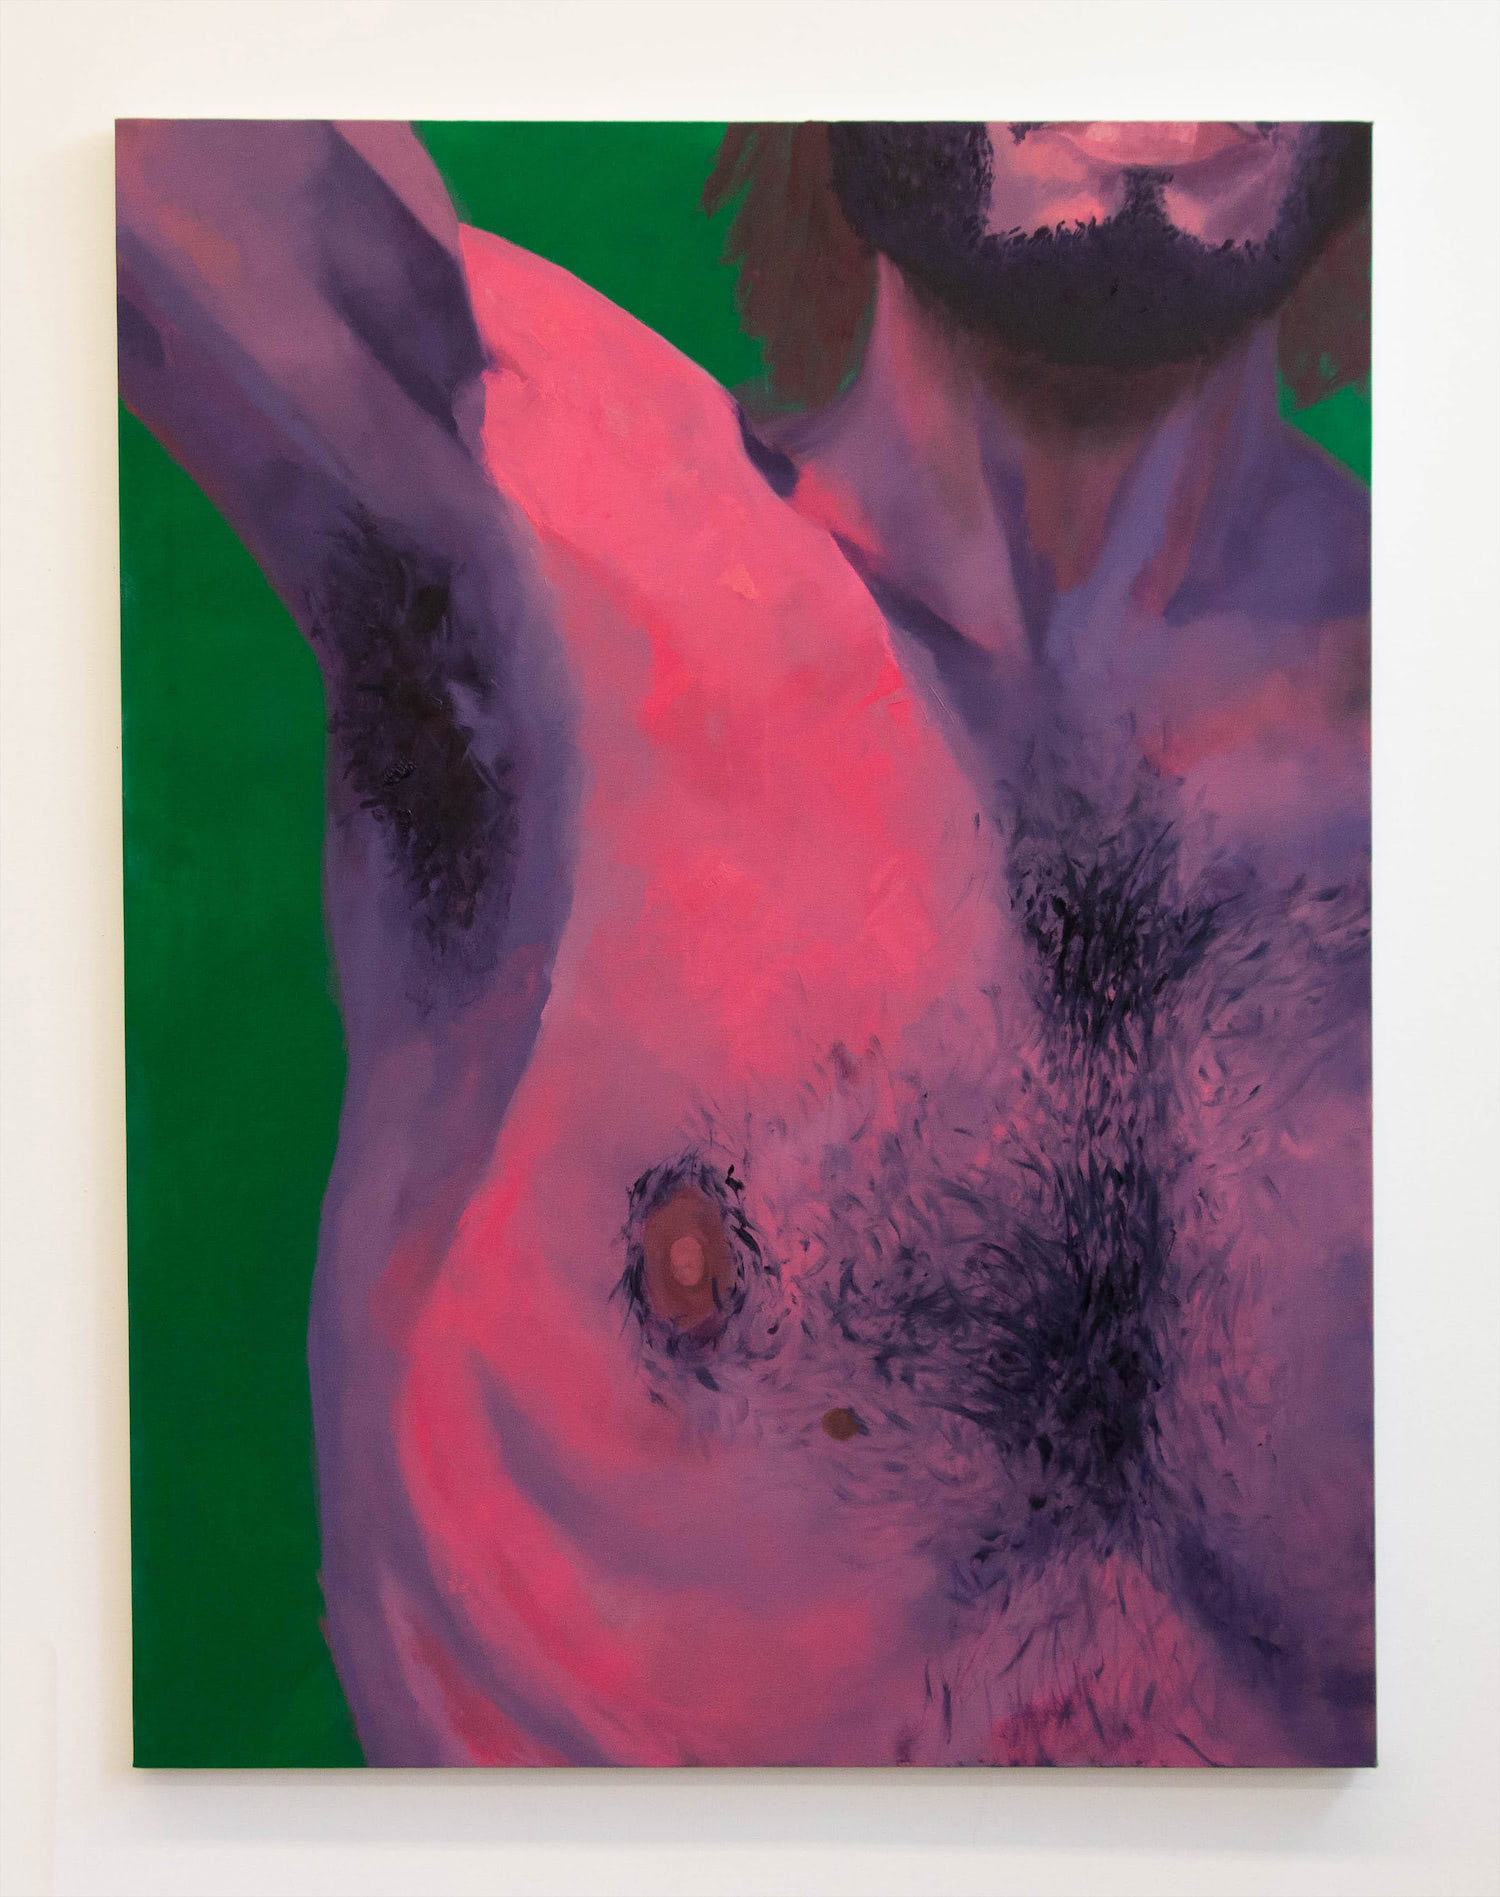 This image displays a body composed of pinks and purples in a vast green space.  A front facing man with his arm reaching upwards fills the majority of this oil painting. The image is cropped just above his armpit, lips, and midsection, displaying an extreme close up of his chest hair, armpit hair, and beard.